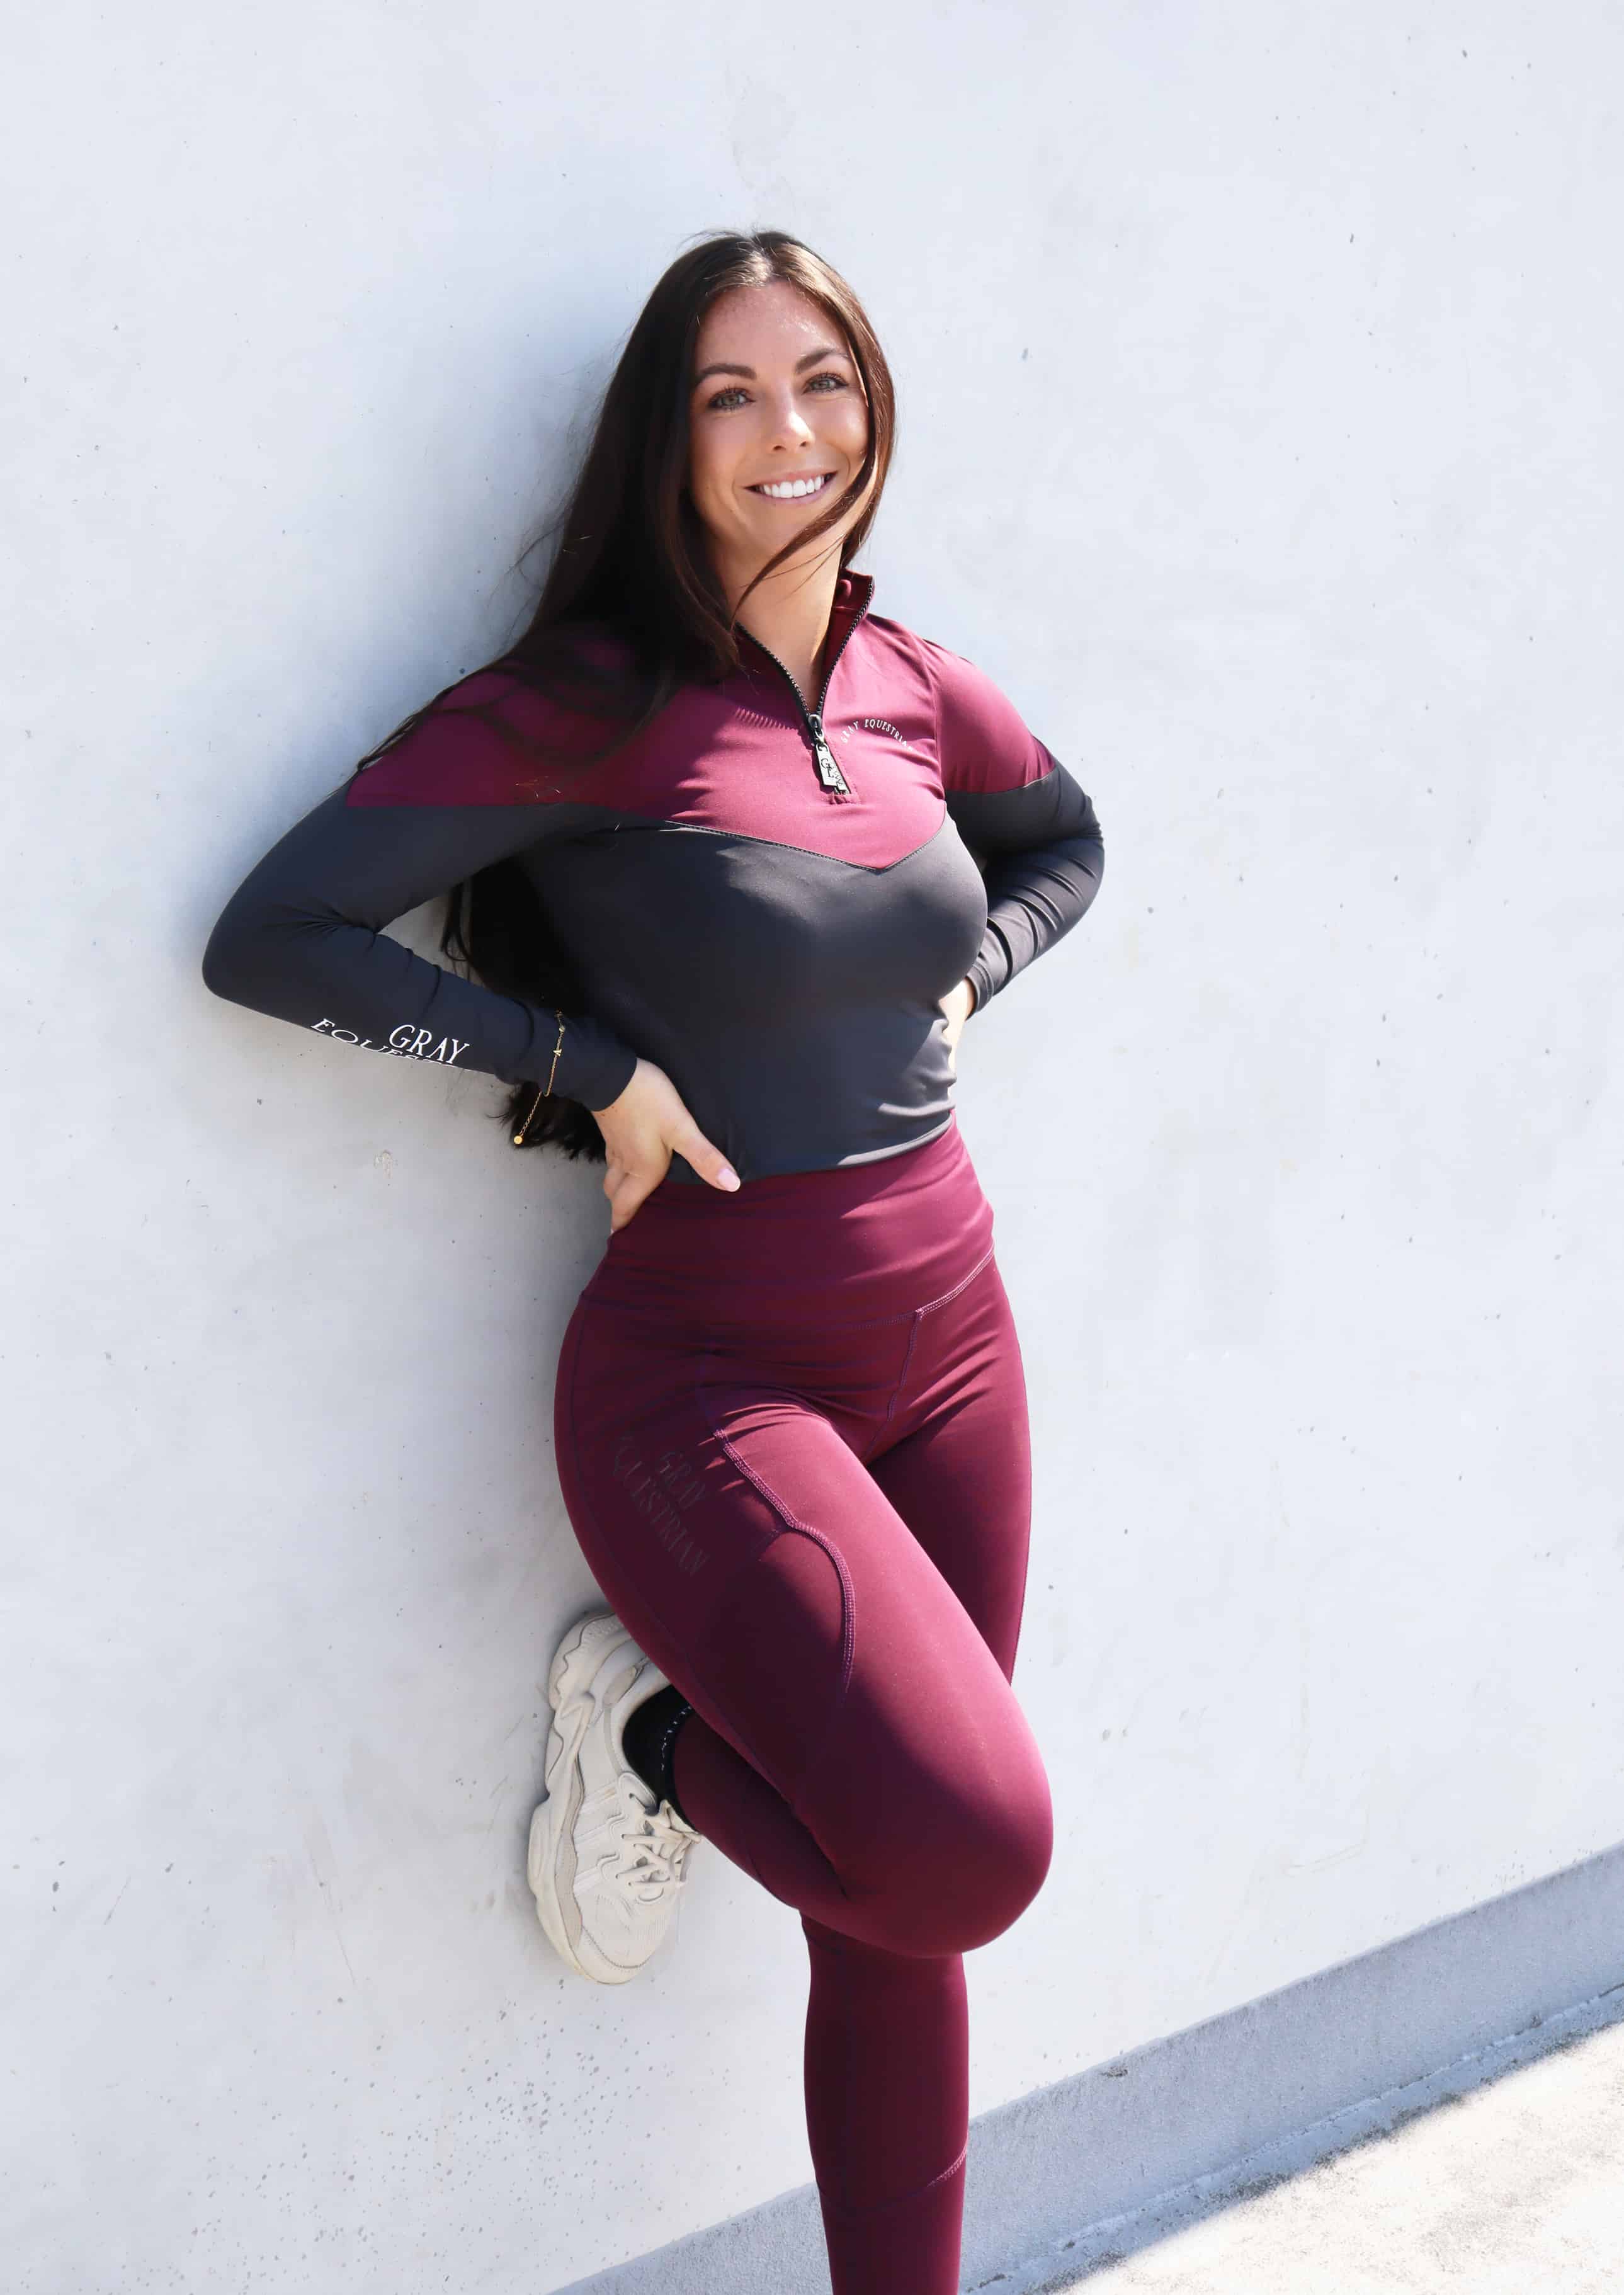 Brunette model wearing burgundy and grey base layer top with burgundy riding leggings leaning against a wall